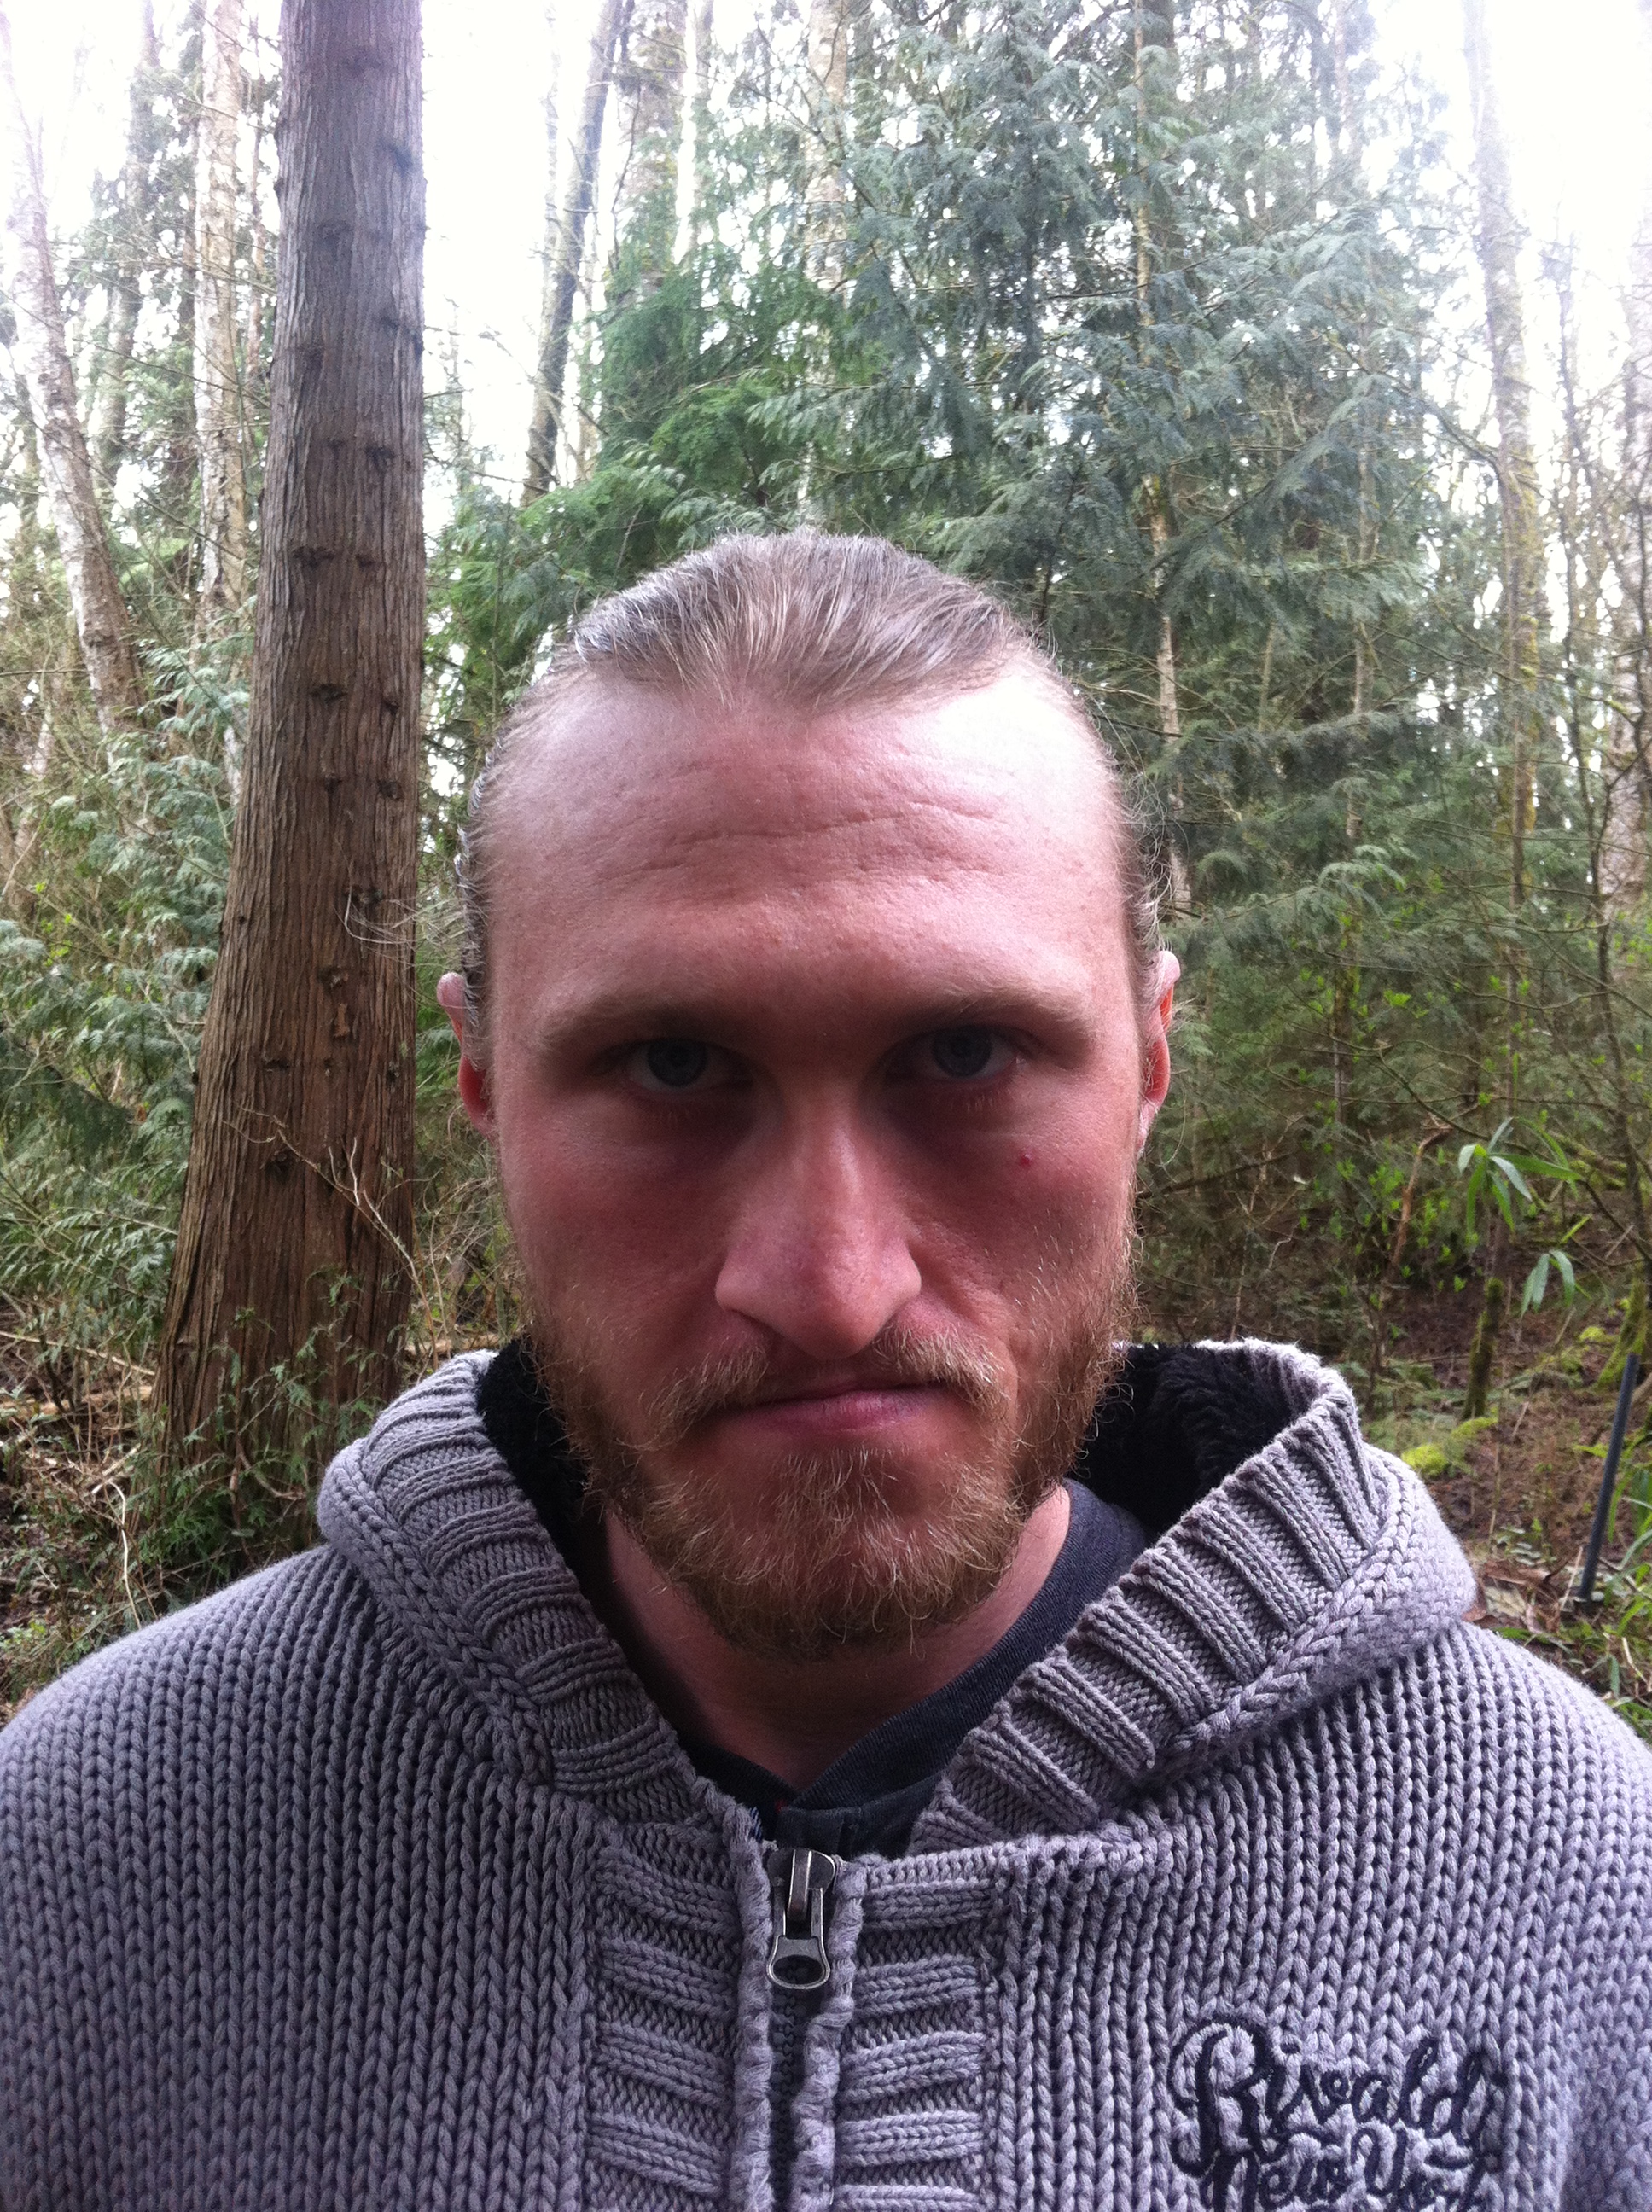 Me in the forests of British Columbia, Canada, pretending to be a viking.